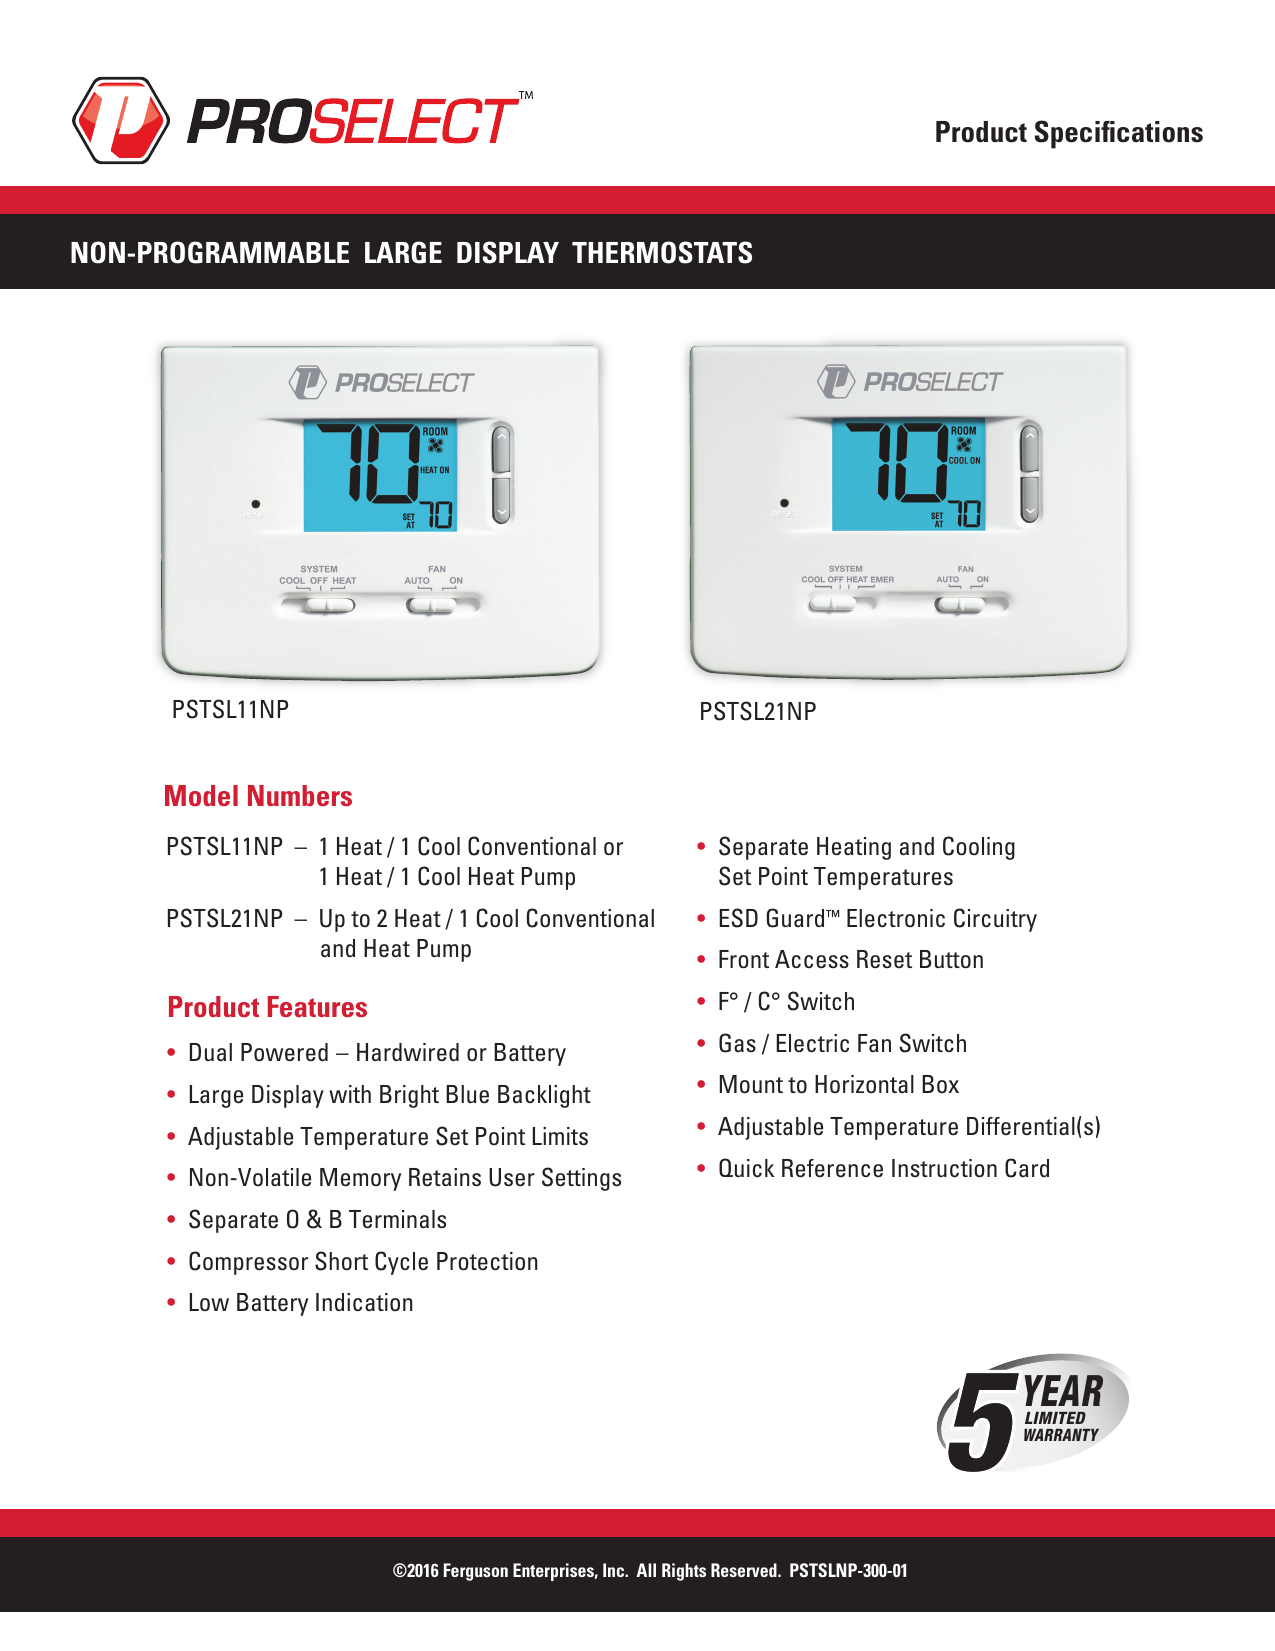 Tools & Home Improvement Robertshaw® Rs2110 Non-programmable Thermostat